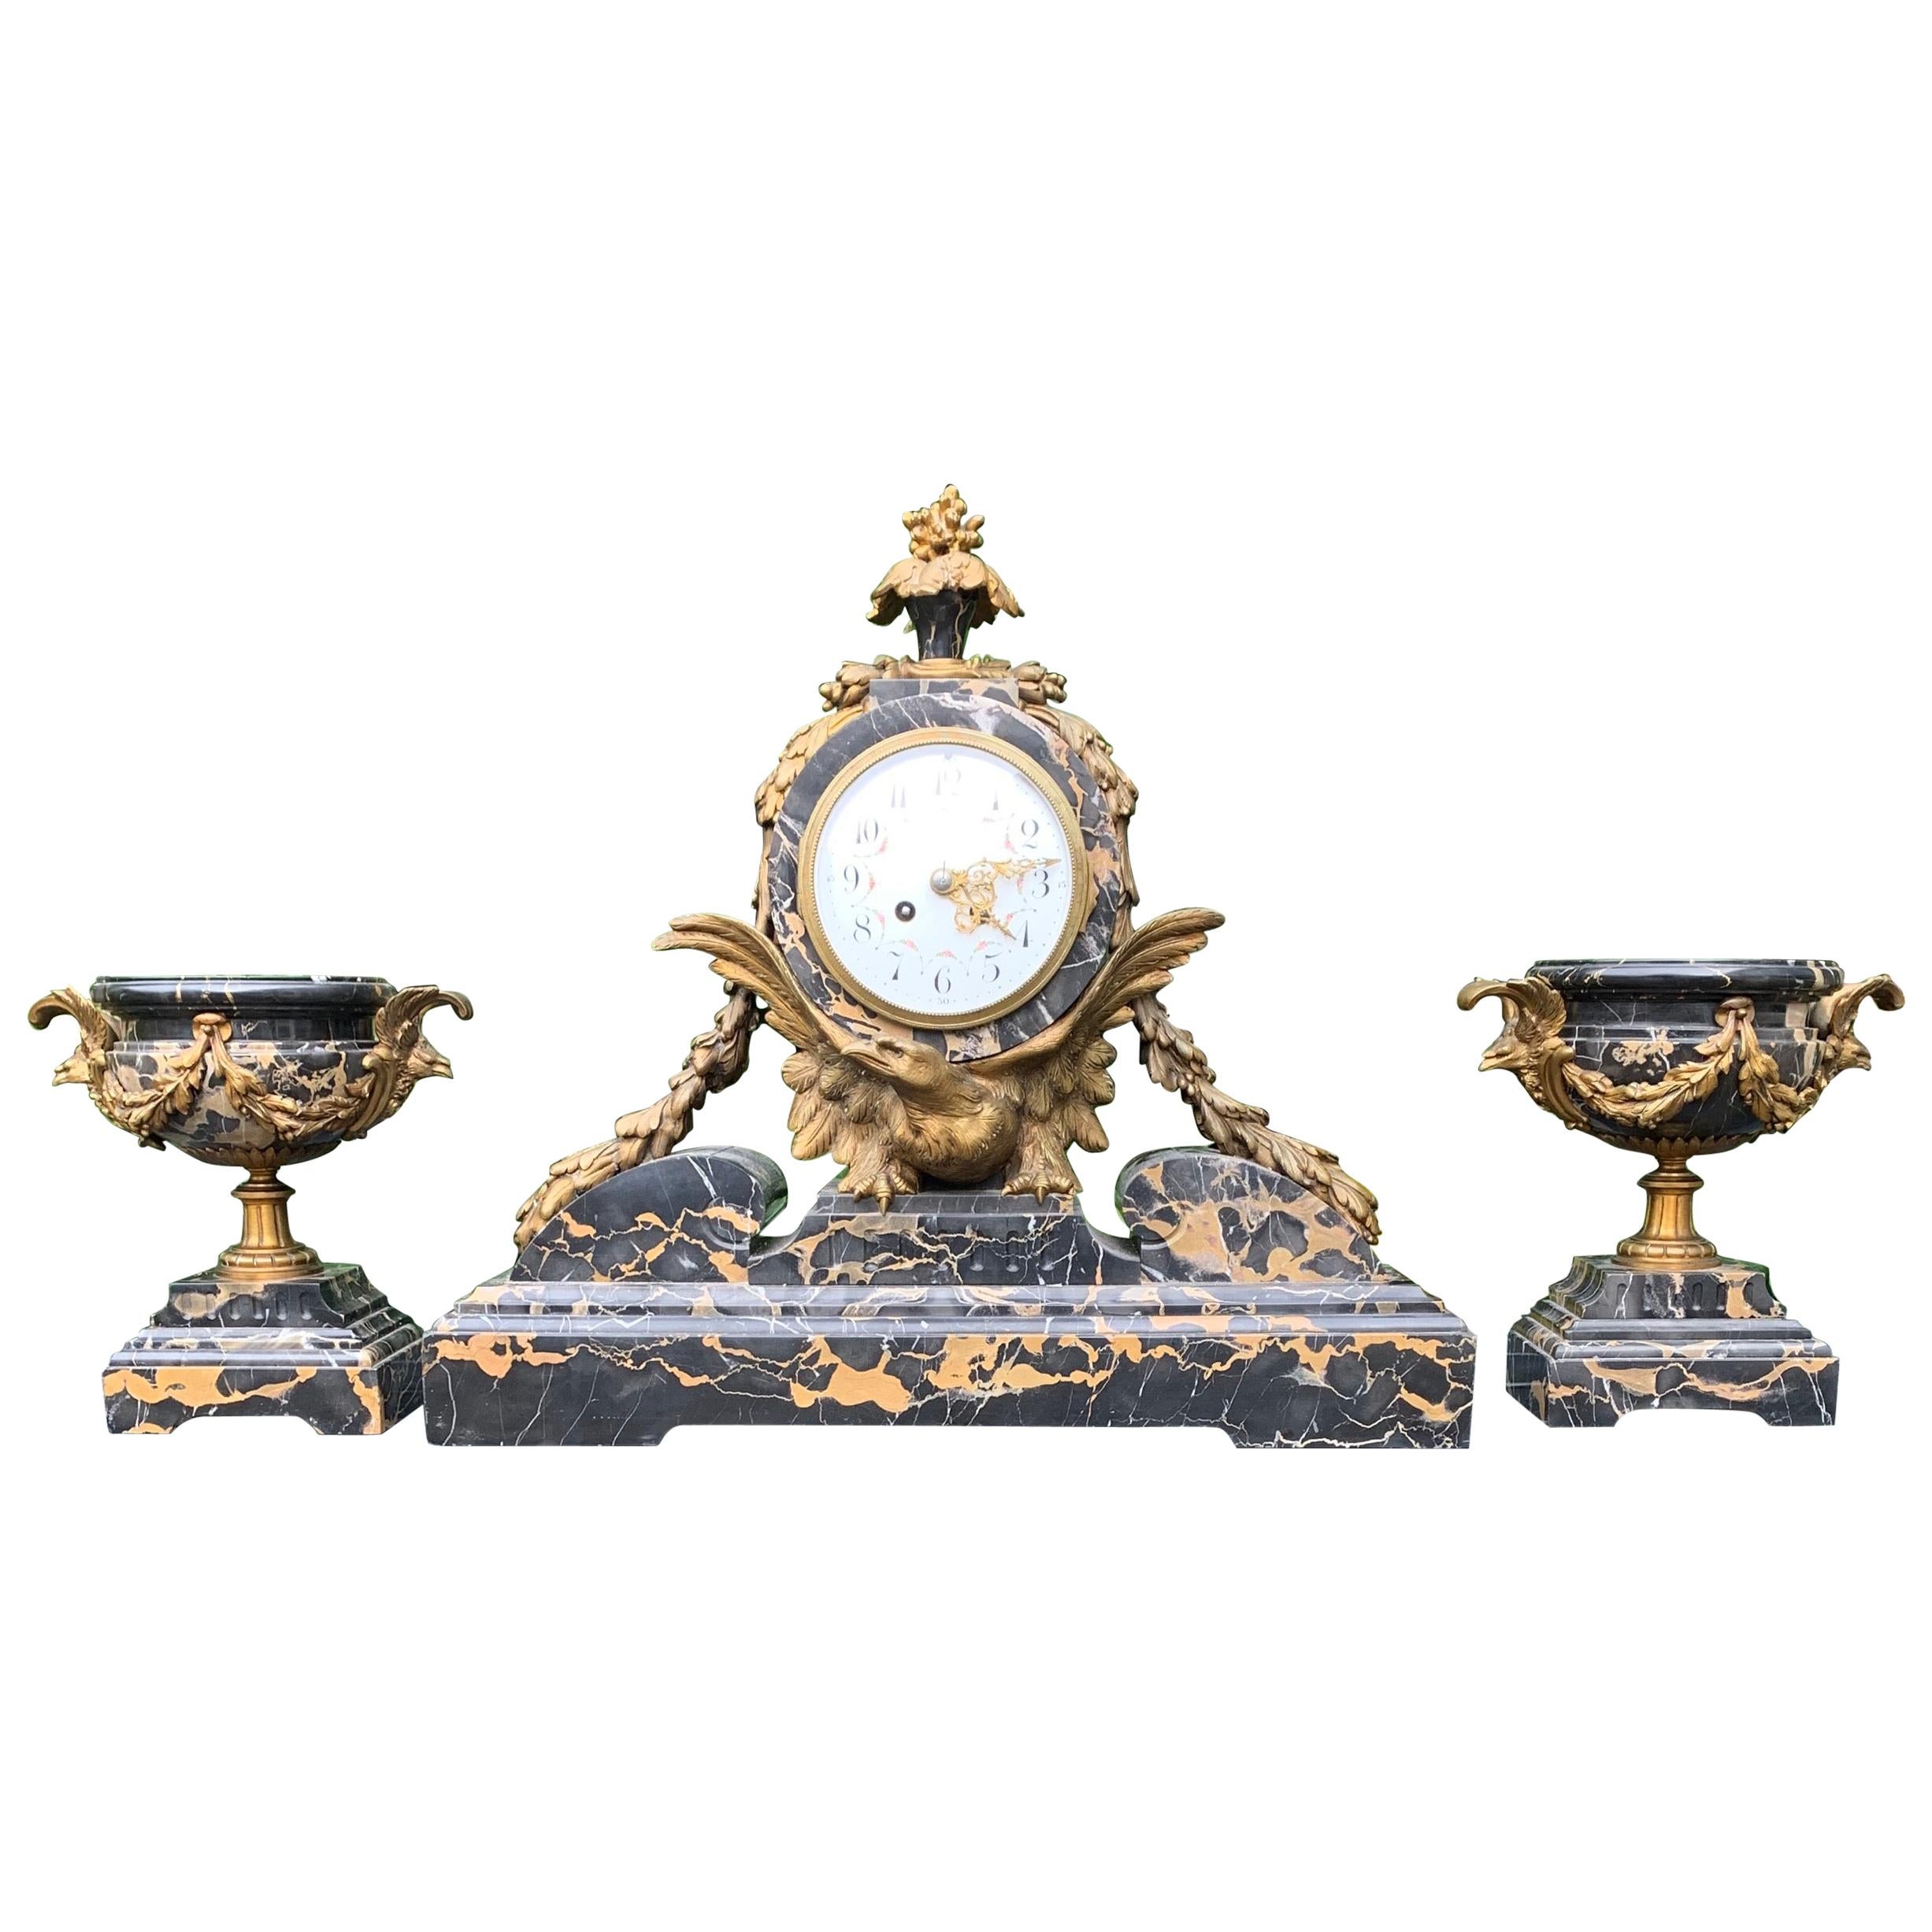 Antique Bronze and Stunning Marble Clock Garniture with Eagle Sculptures